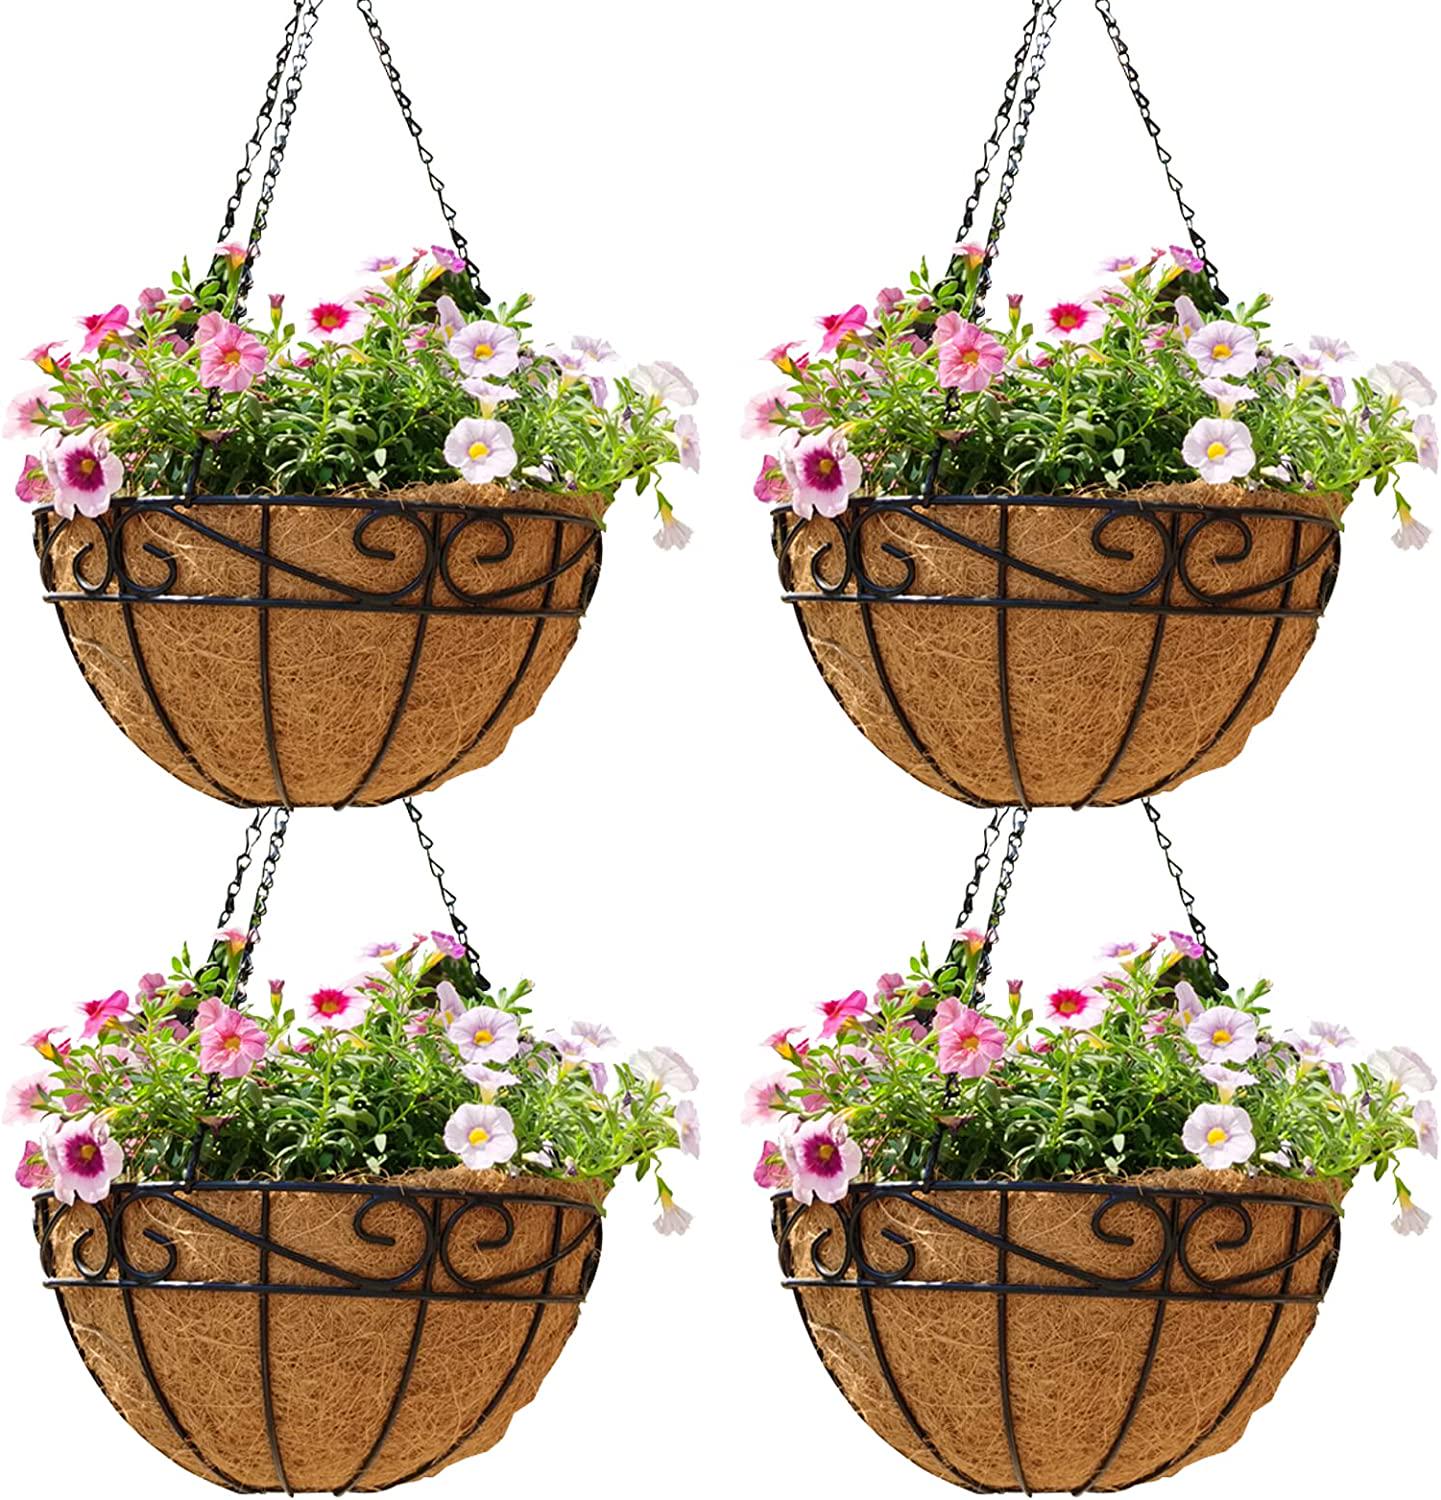 10 inch Metal Hanging Baskets For Plants Outdoor 4 Pack Round Metal Wire Hanging Basket Planter with Coco Fiber Liners Chain Round Wire Plant Holder for Garden, Patio, Deck, Porch Plants Flower Potsss-